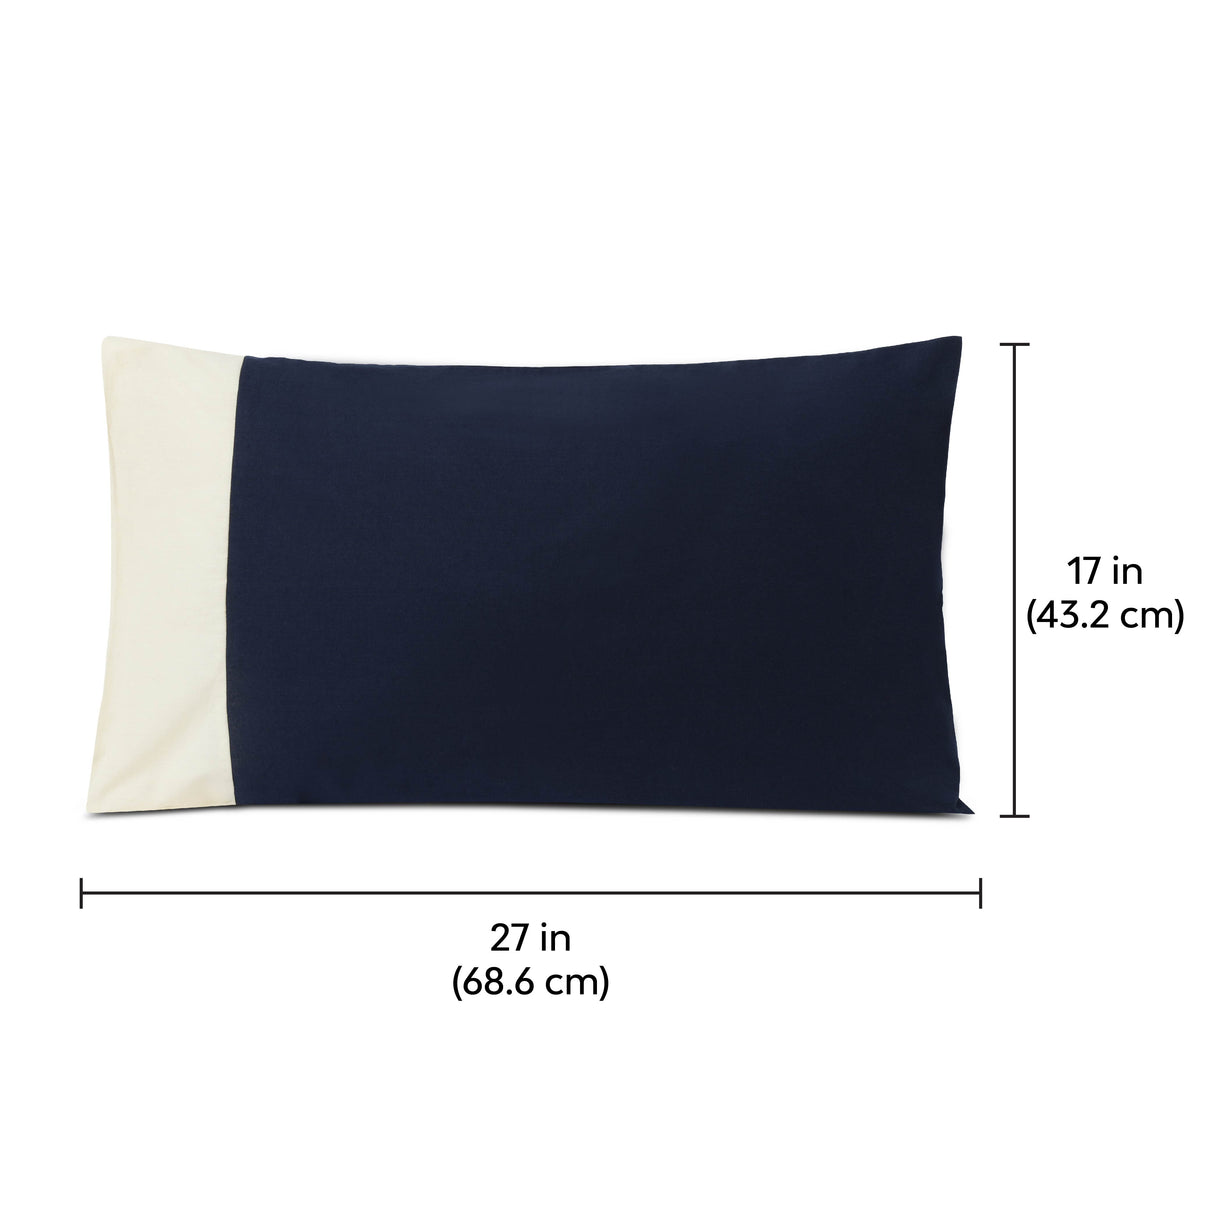 Pillow cover with dimensions 